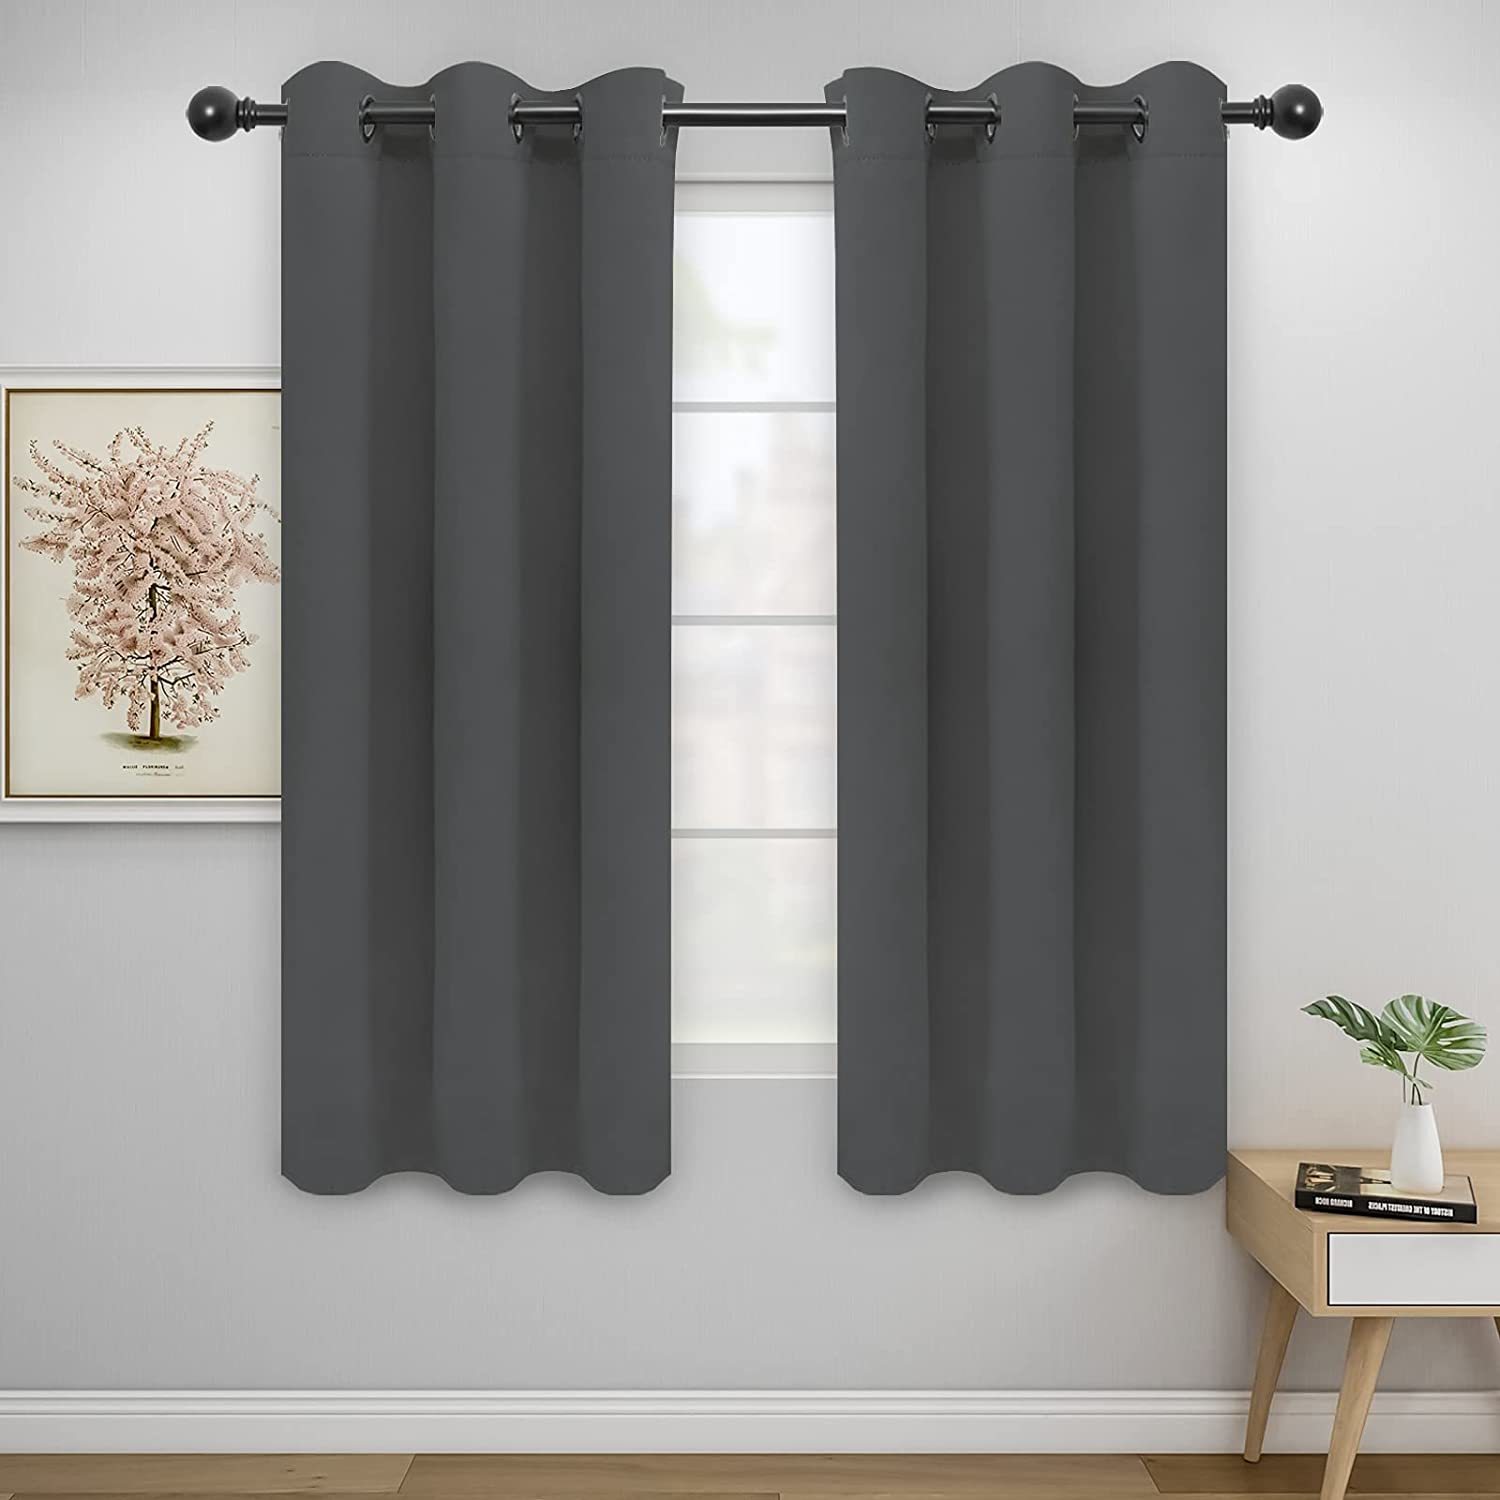 Primary image for Easy-Going Blackout Curtains For The Bedroom, Thermal Insulated Window, Gray).